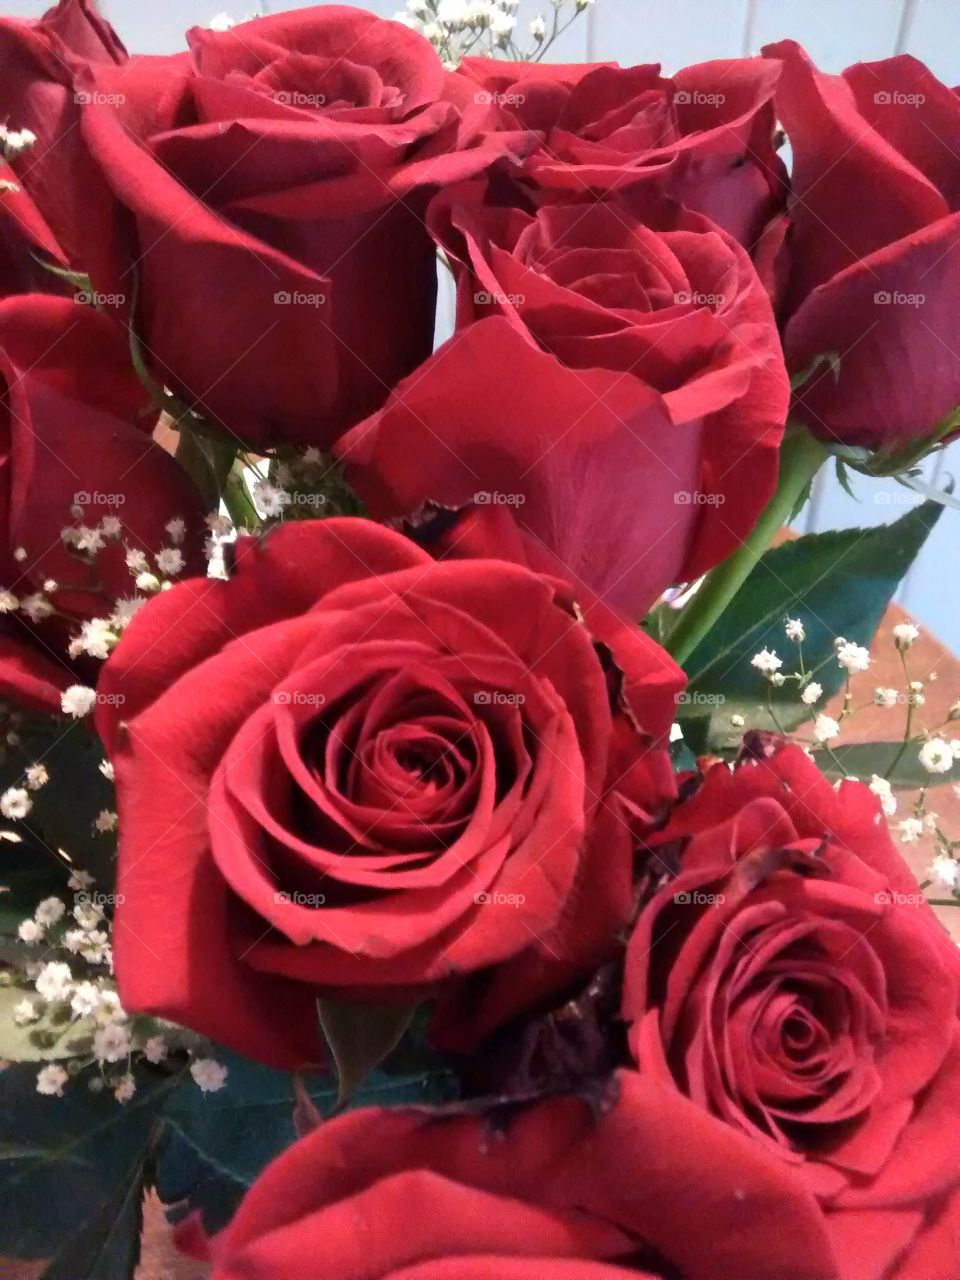 red roses for Mom. Red roses tell mom you love her on mother's day... or any other day! Works for boyfriends and husband too!